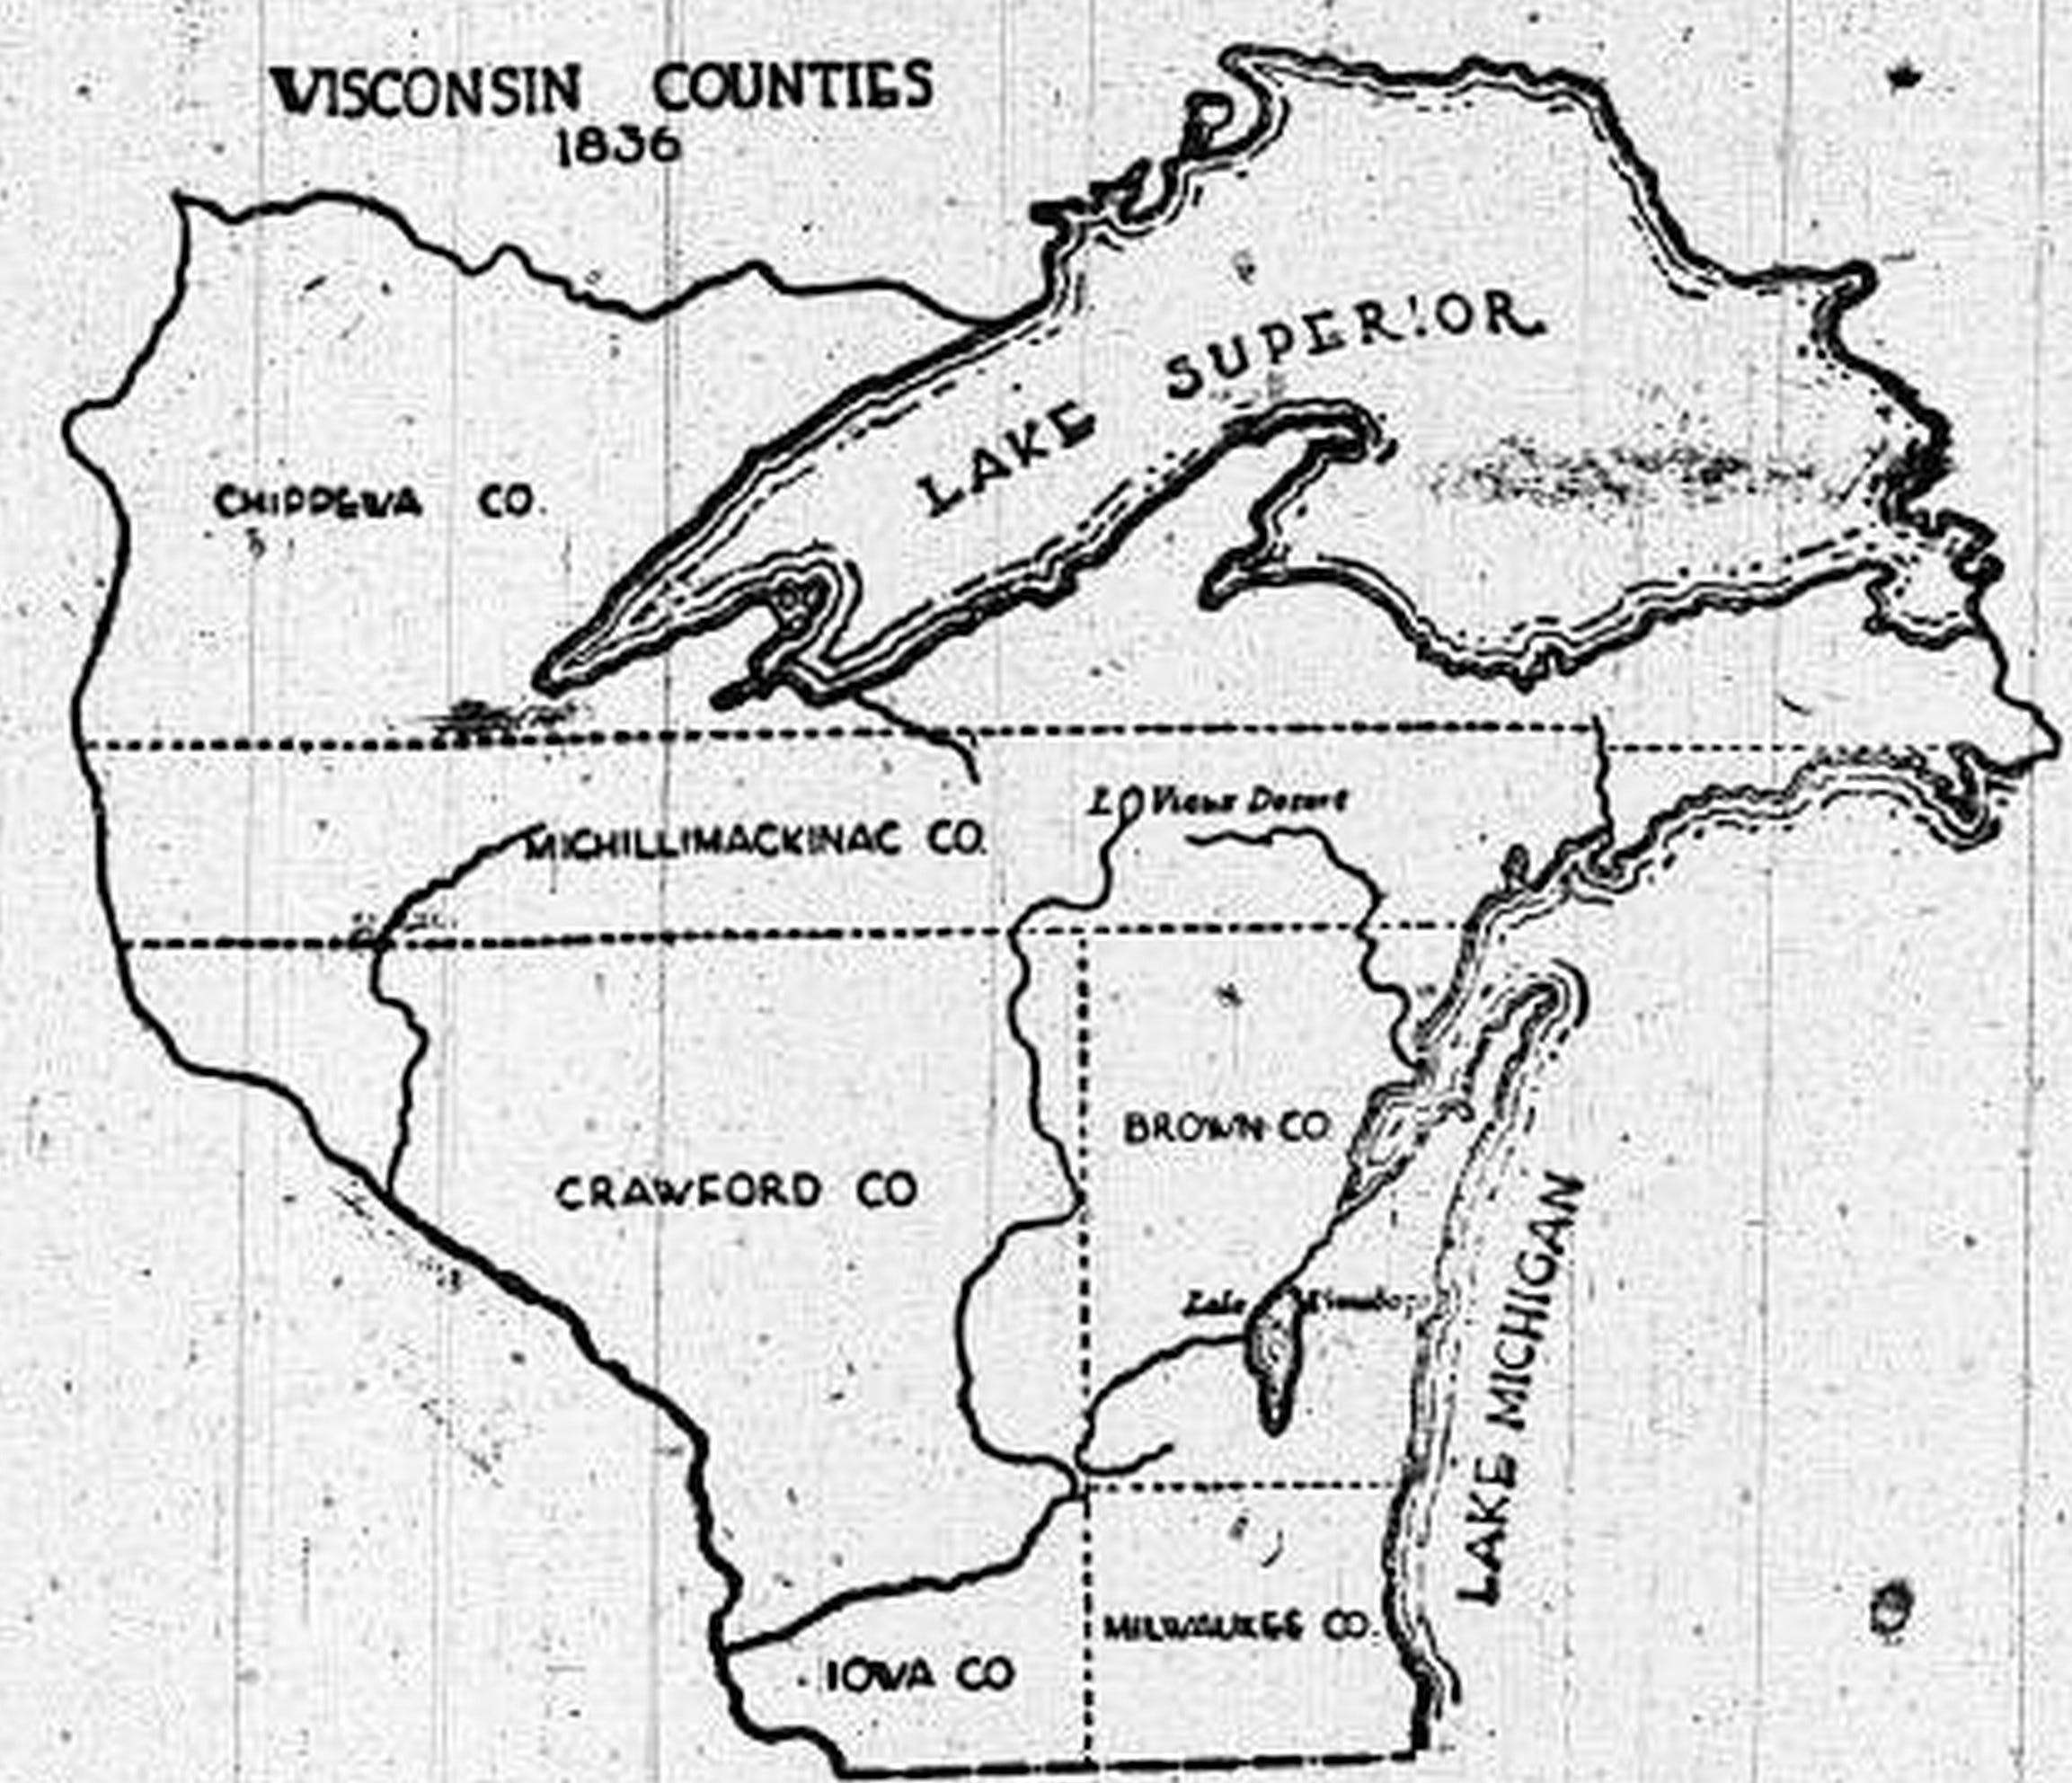 From Meskousing to Ouisconsin to Wisconsin: How the Badger State got its name